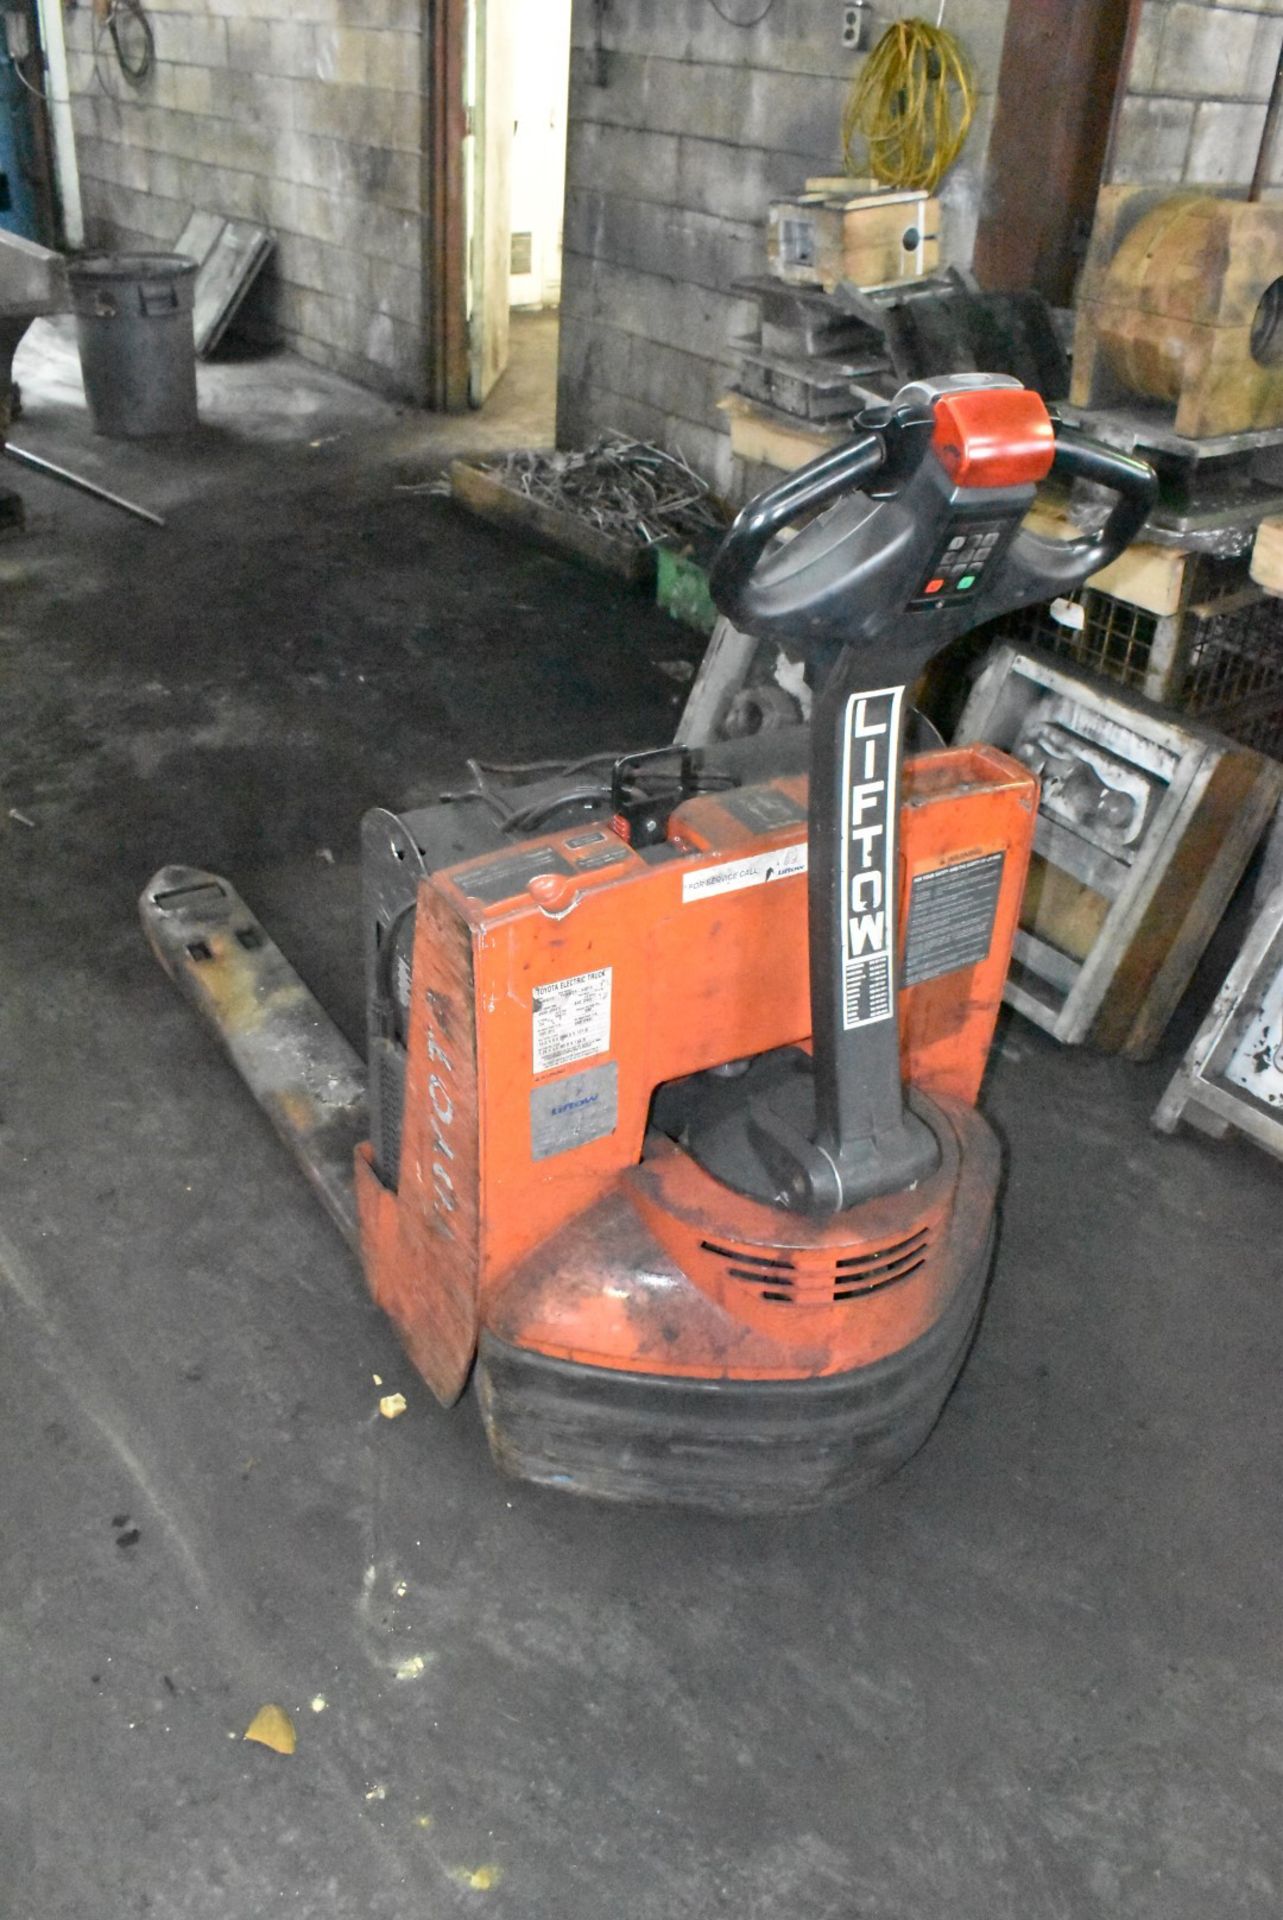 TOYOTA 7HBW23 4500 LB. CAPACITY 24V ELECTRIC WALK-BEHIND PALLET TRUCK WITH ON-BOARD CHARGER, S/N: - Image 2 of 4